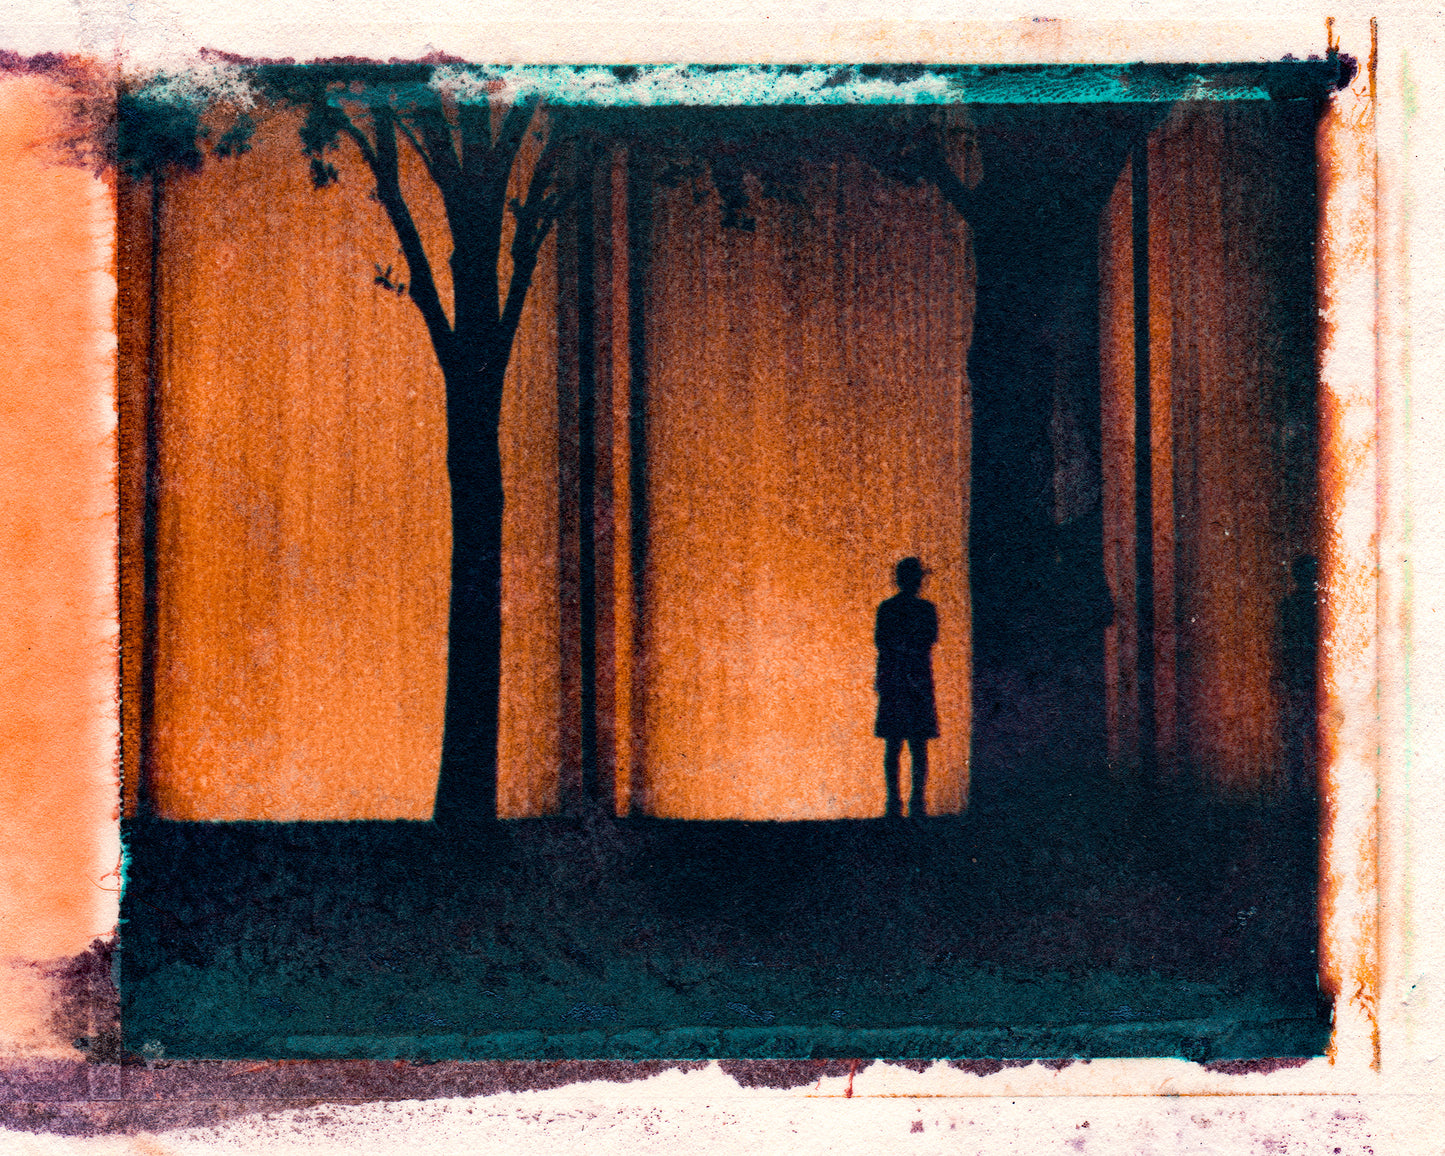 Polaroid transfer of silhouette  of man and two trees with city waterfall in the background